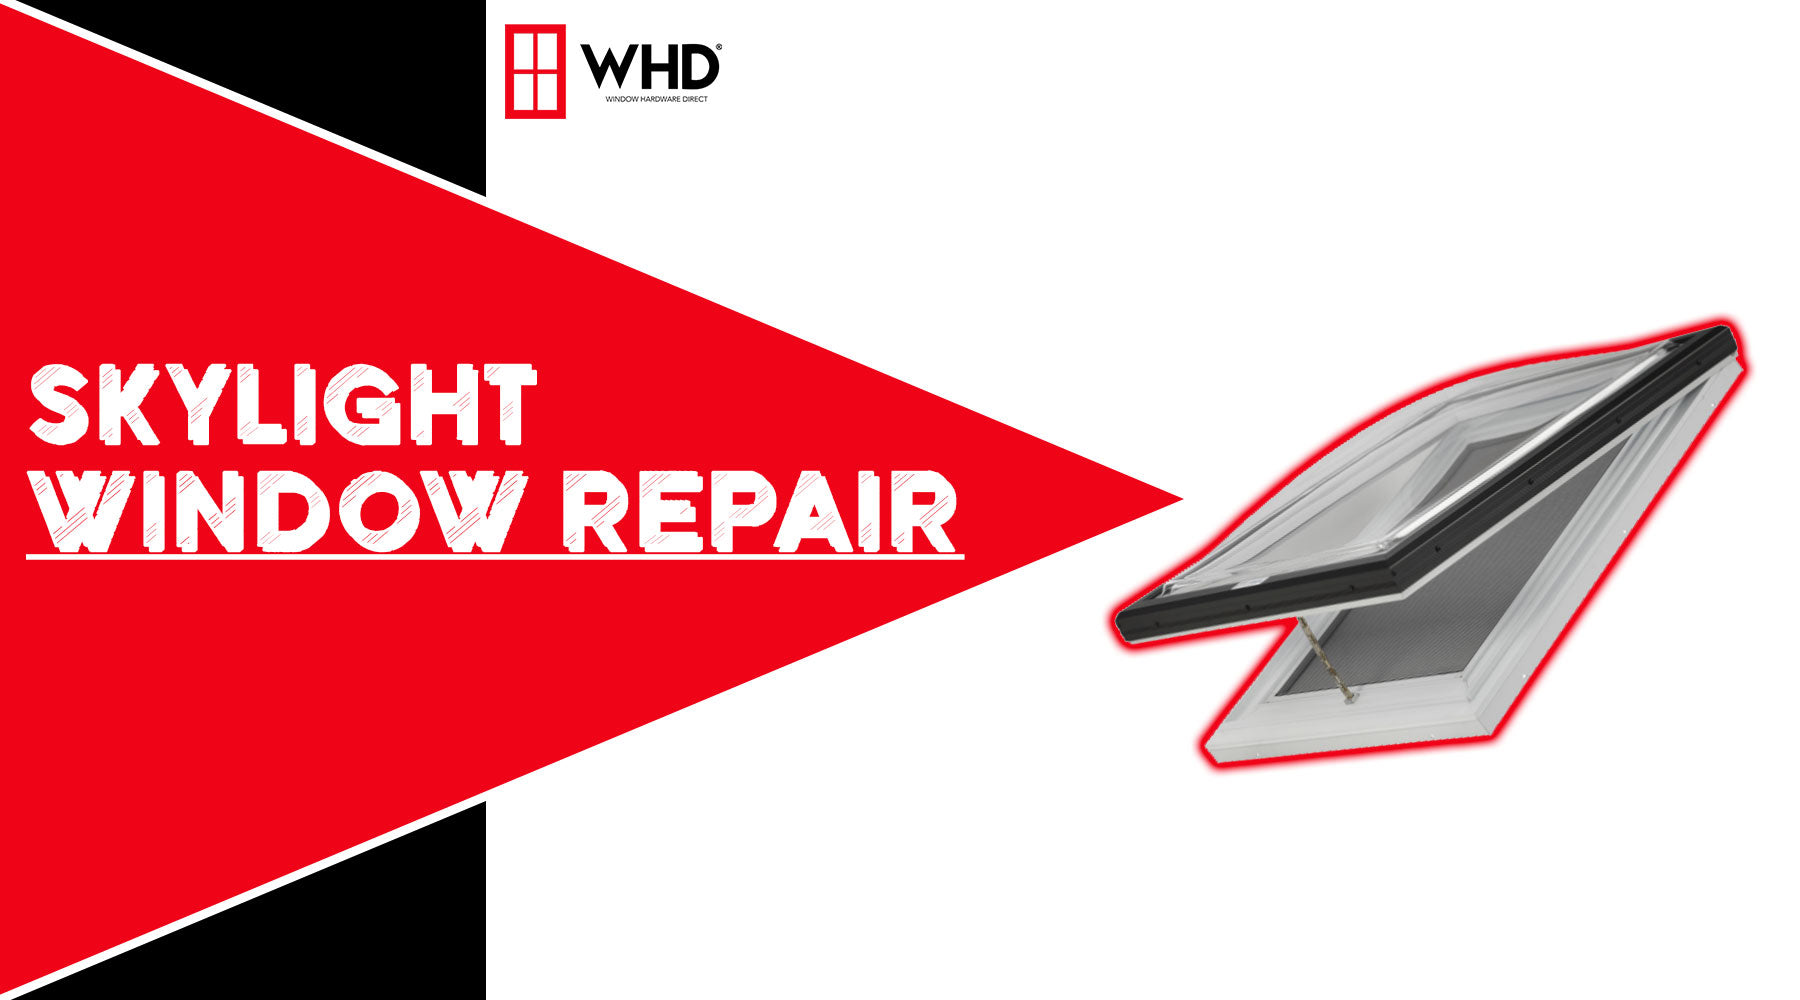 Let There Be Light: Skylight Repair for Residential Windows